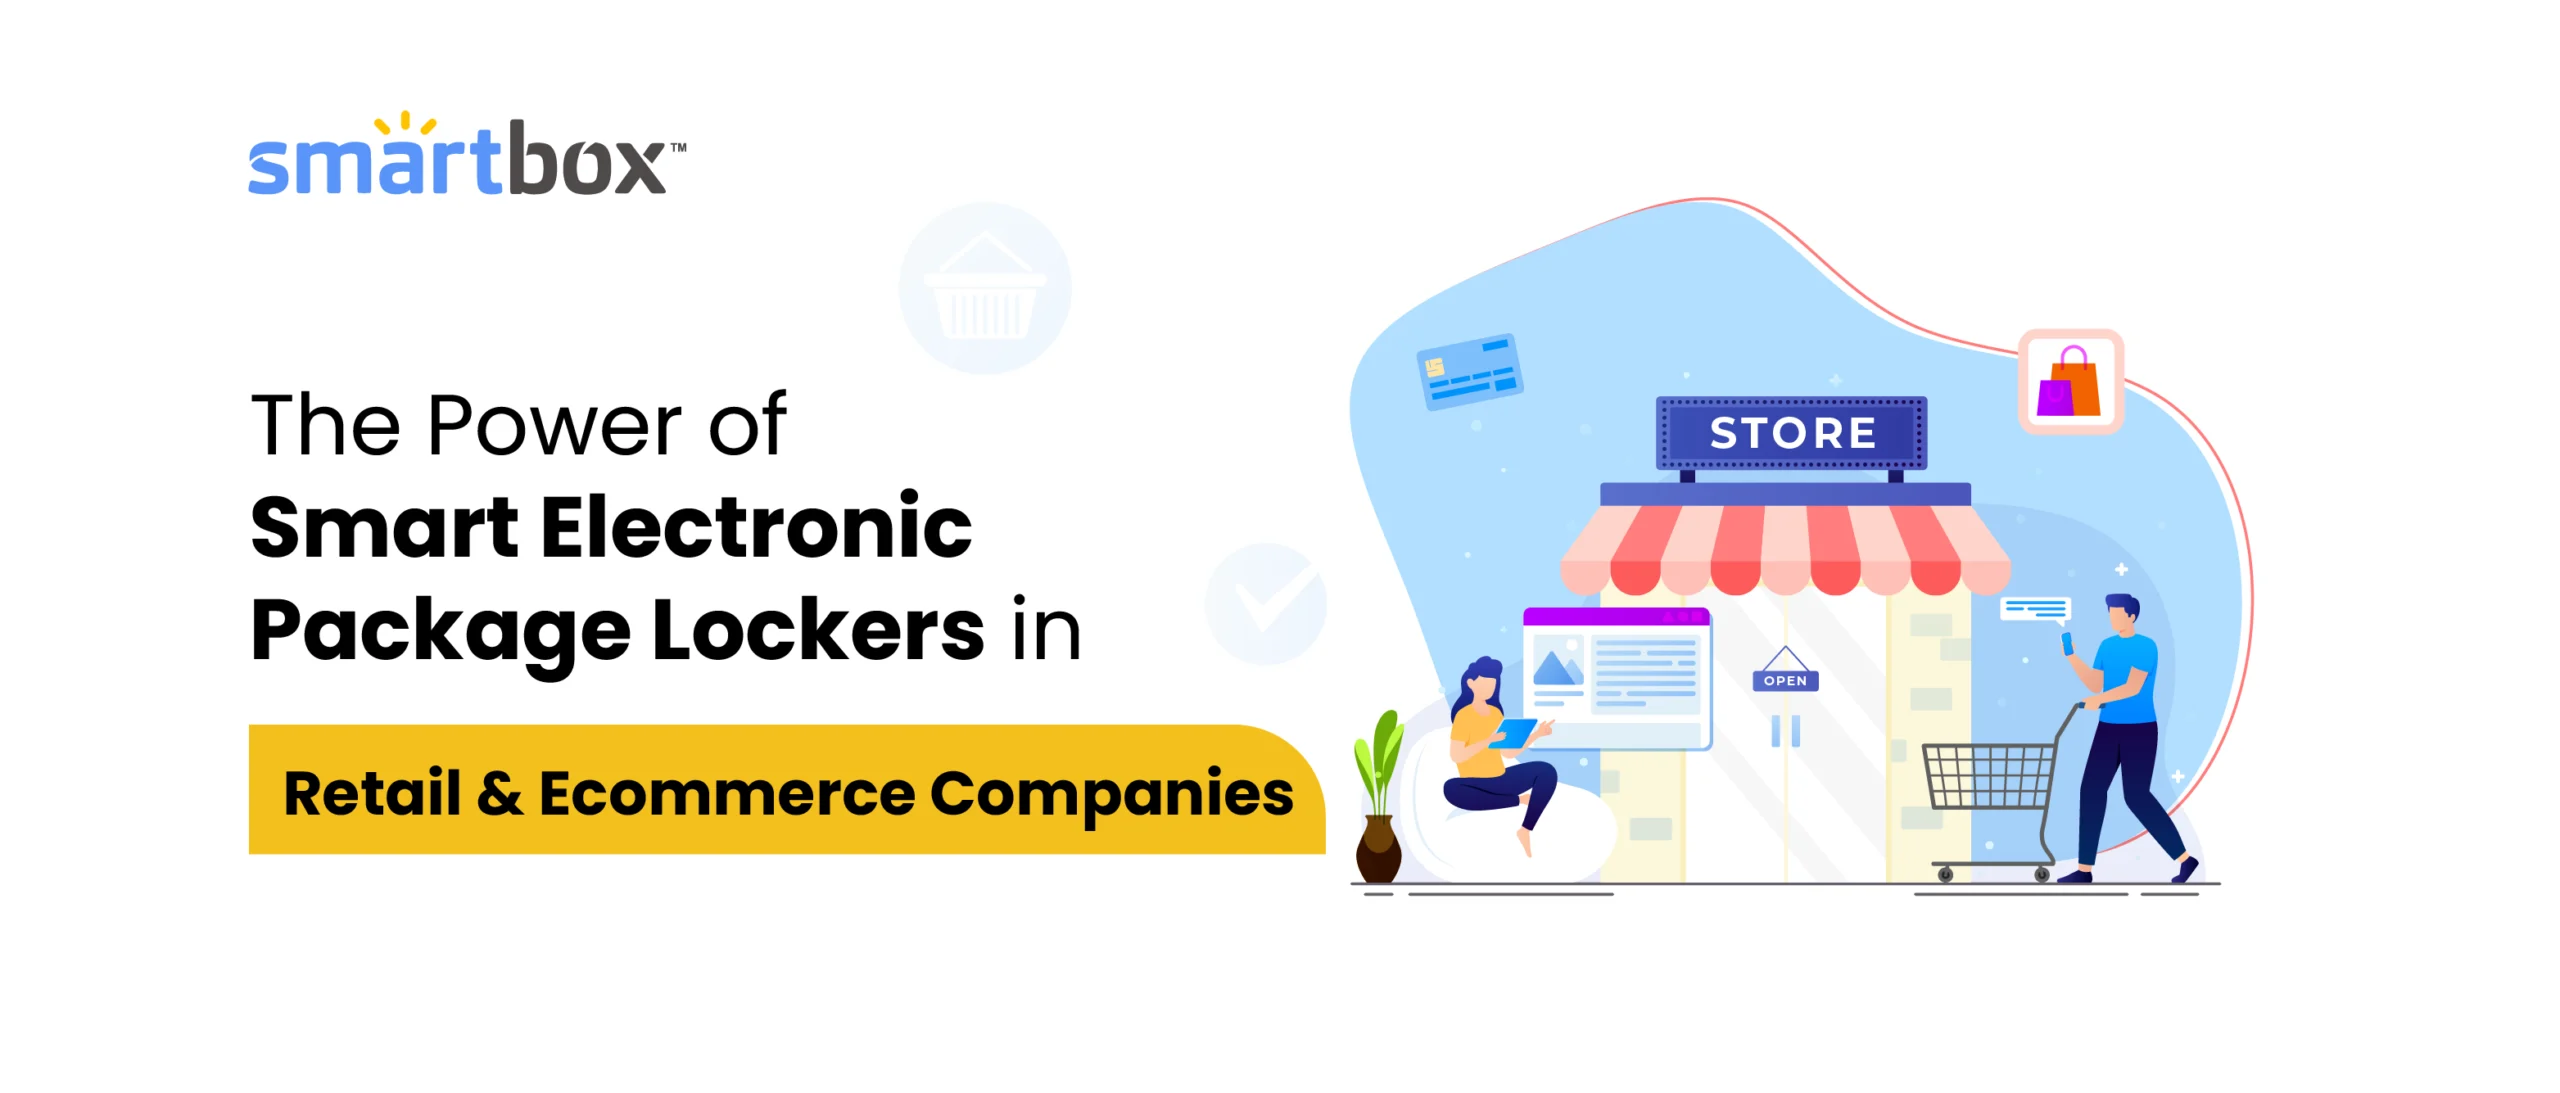 Retail and e-commerce customers in an illustration with text 'The Power of Smart Electronic Package Lockers in Retail and E-Commerce Companies'